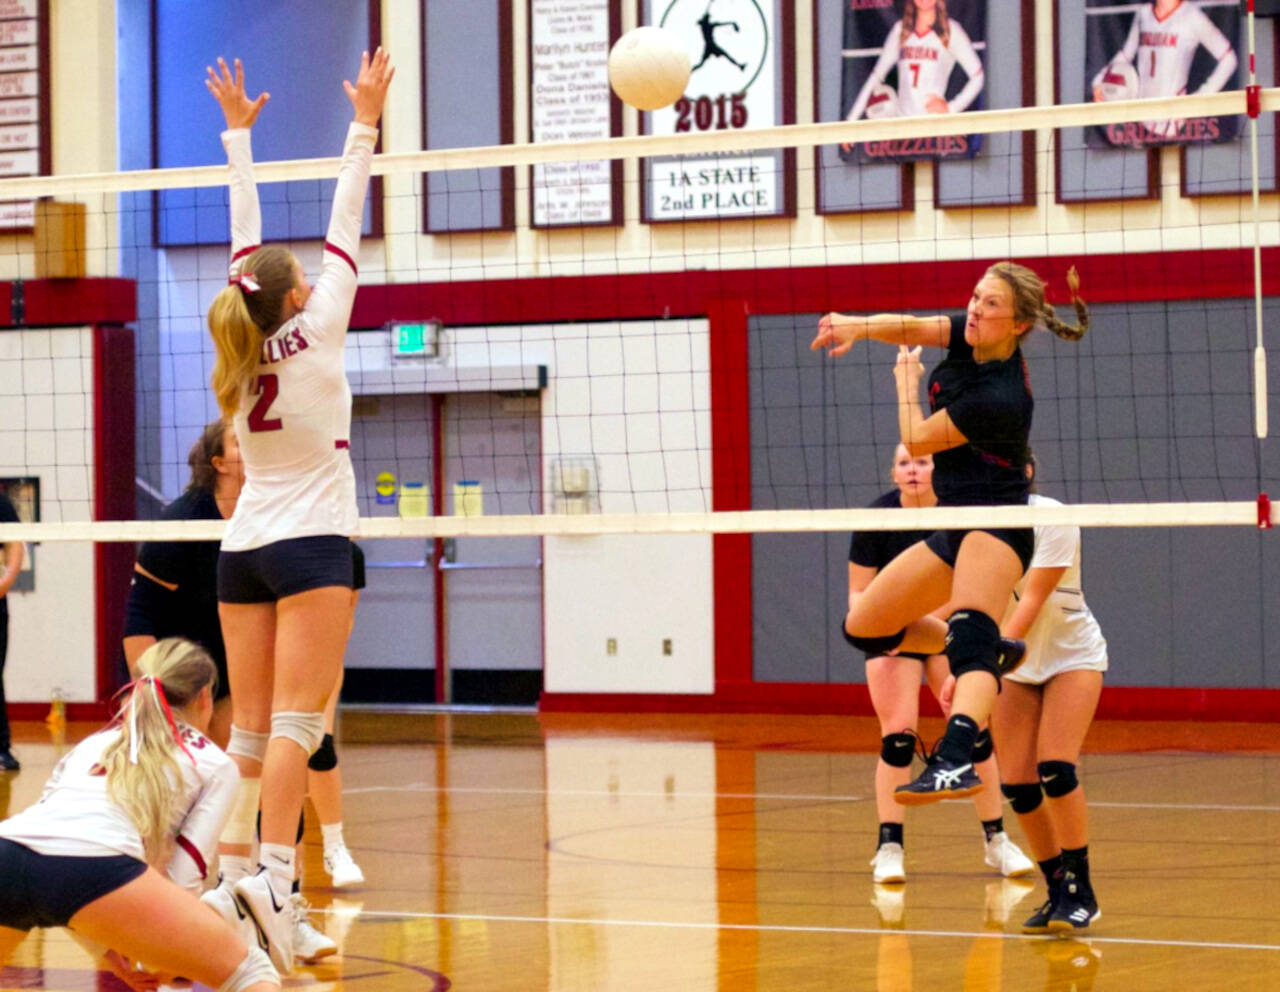 PHOTO BY PATTI REYNVAAN
Raymond’s Karsyn Freeman, right, attempts a kill while Hoquiam’s Kristina Goulet (2) defends during the Seagulls straight-set victory on Thursday at Hoquiam Square Garden.